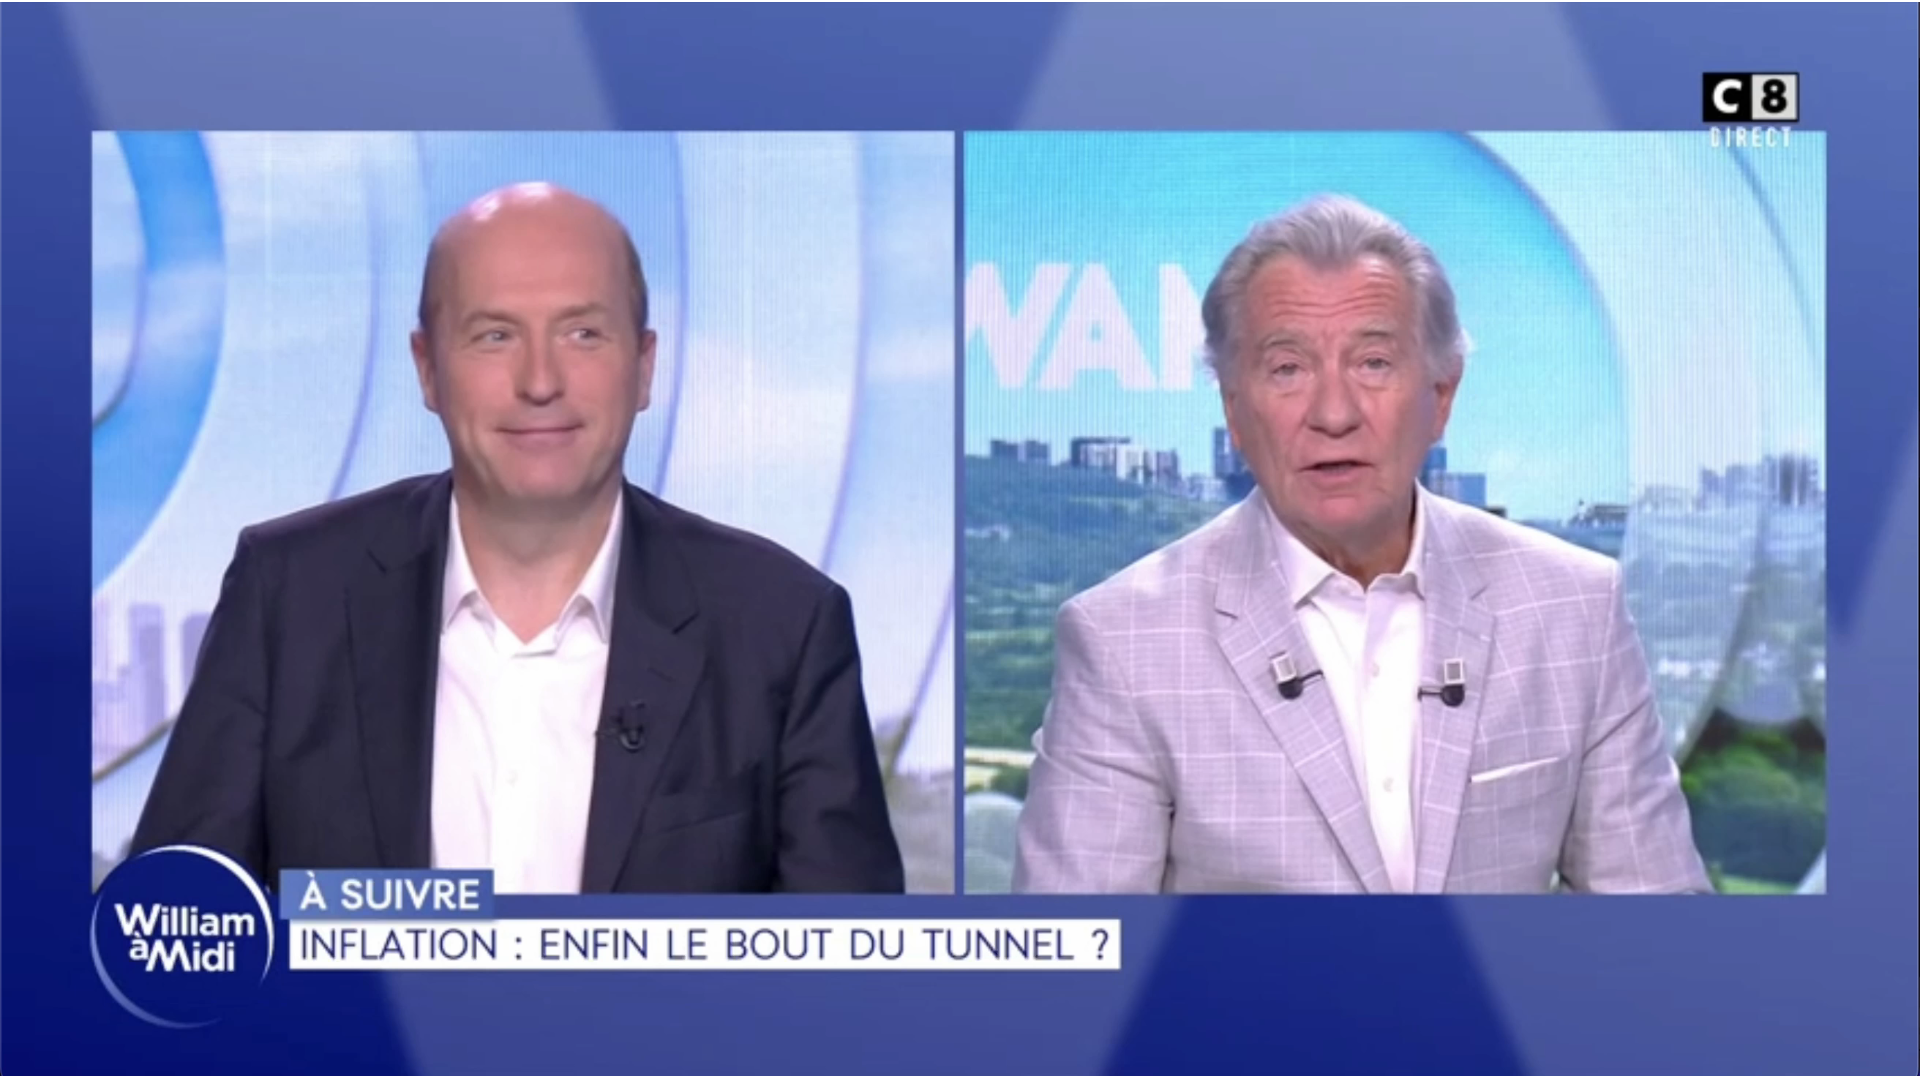 Rodolphe Bonnasse : Inflation : le bout du tunnel ? / WILLIAM A MIDI